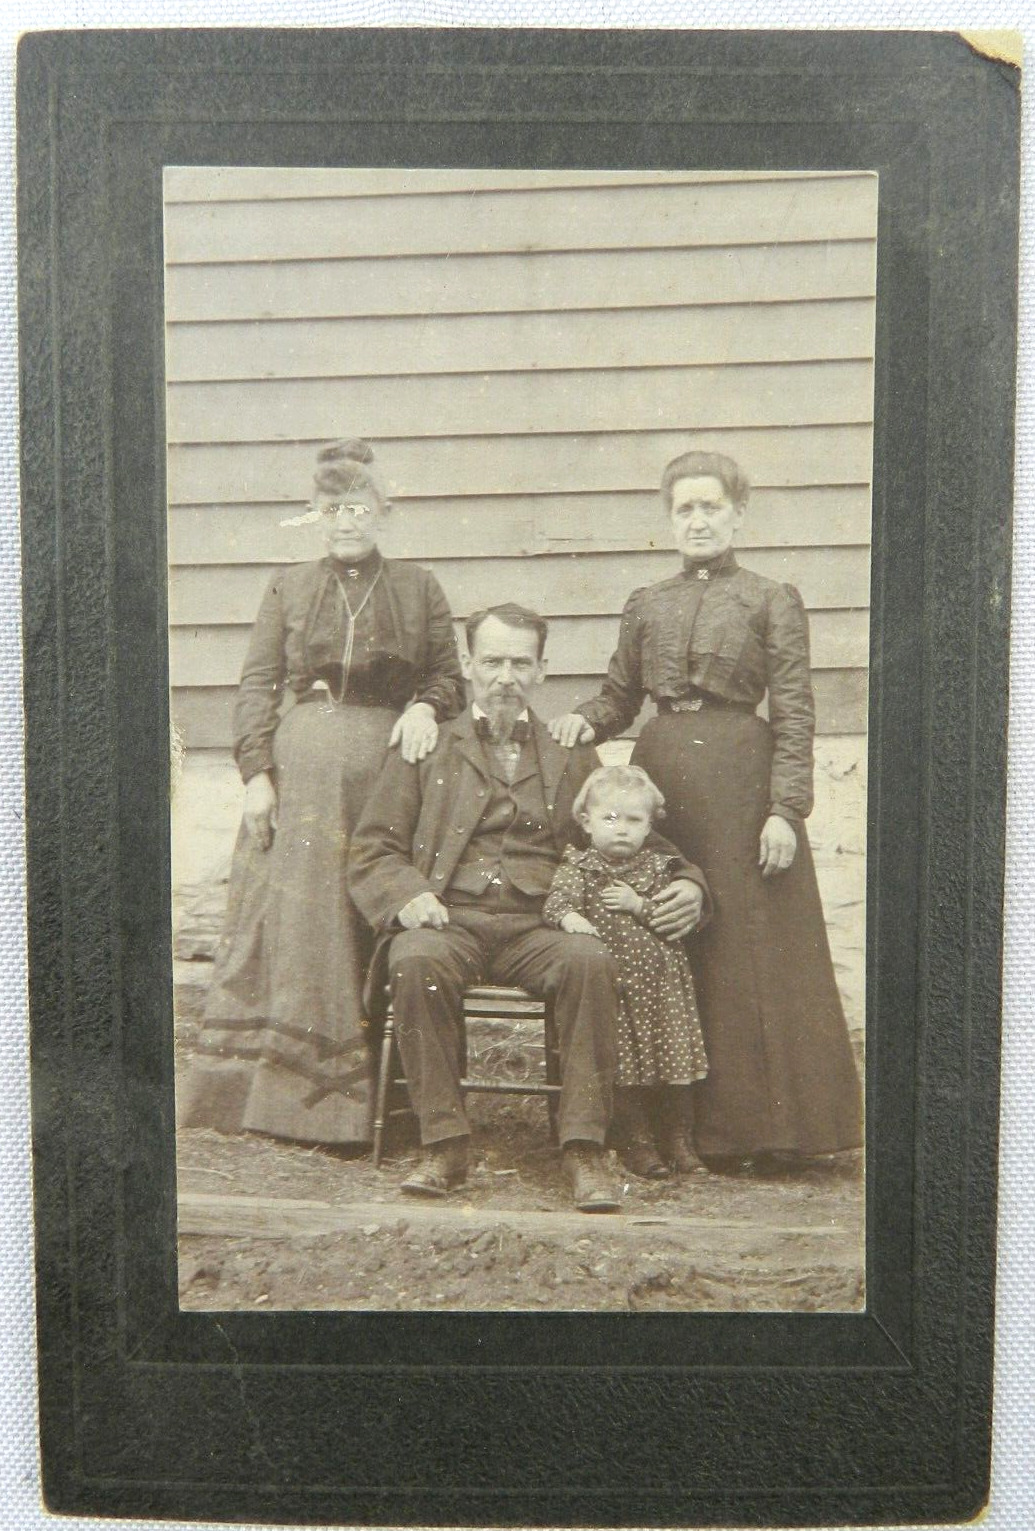 Family of Four Stand Outside Home in Formal Dress Portrait- c.1900s Cabinet Card